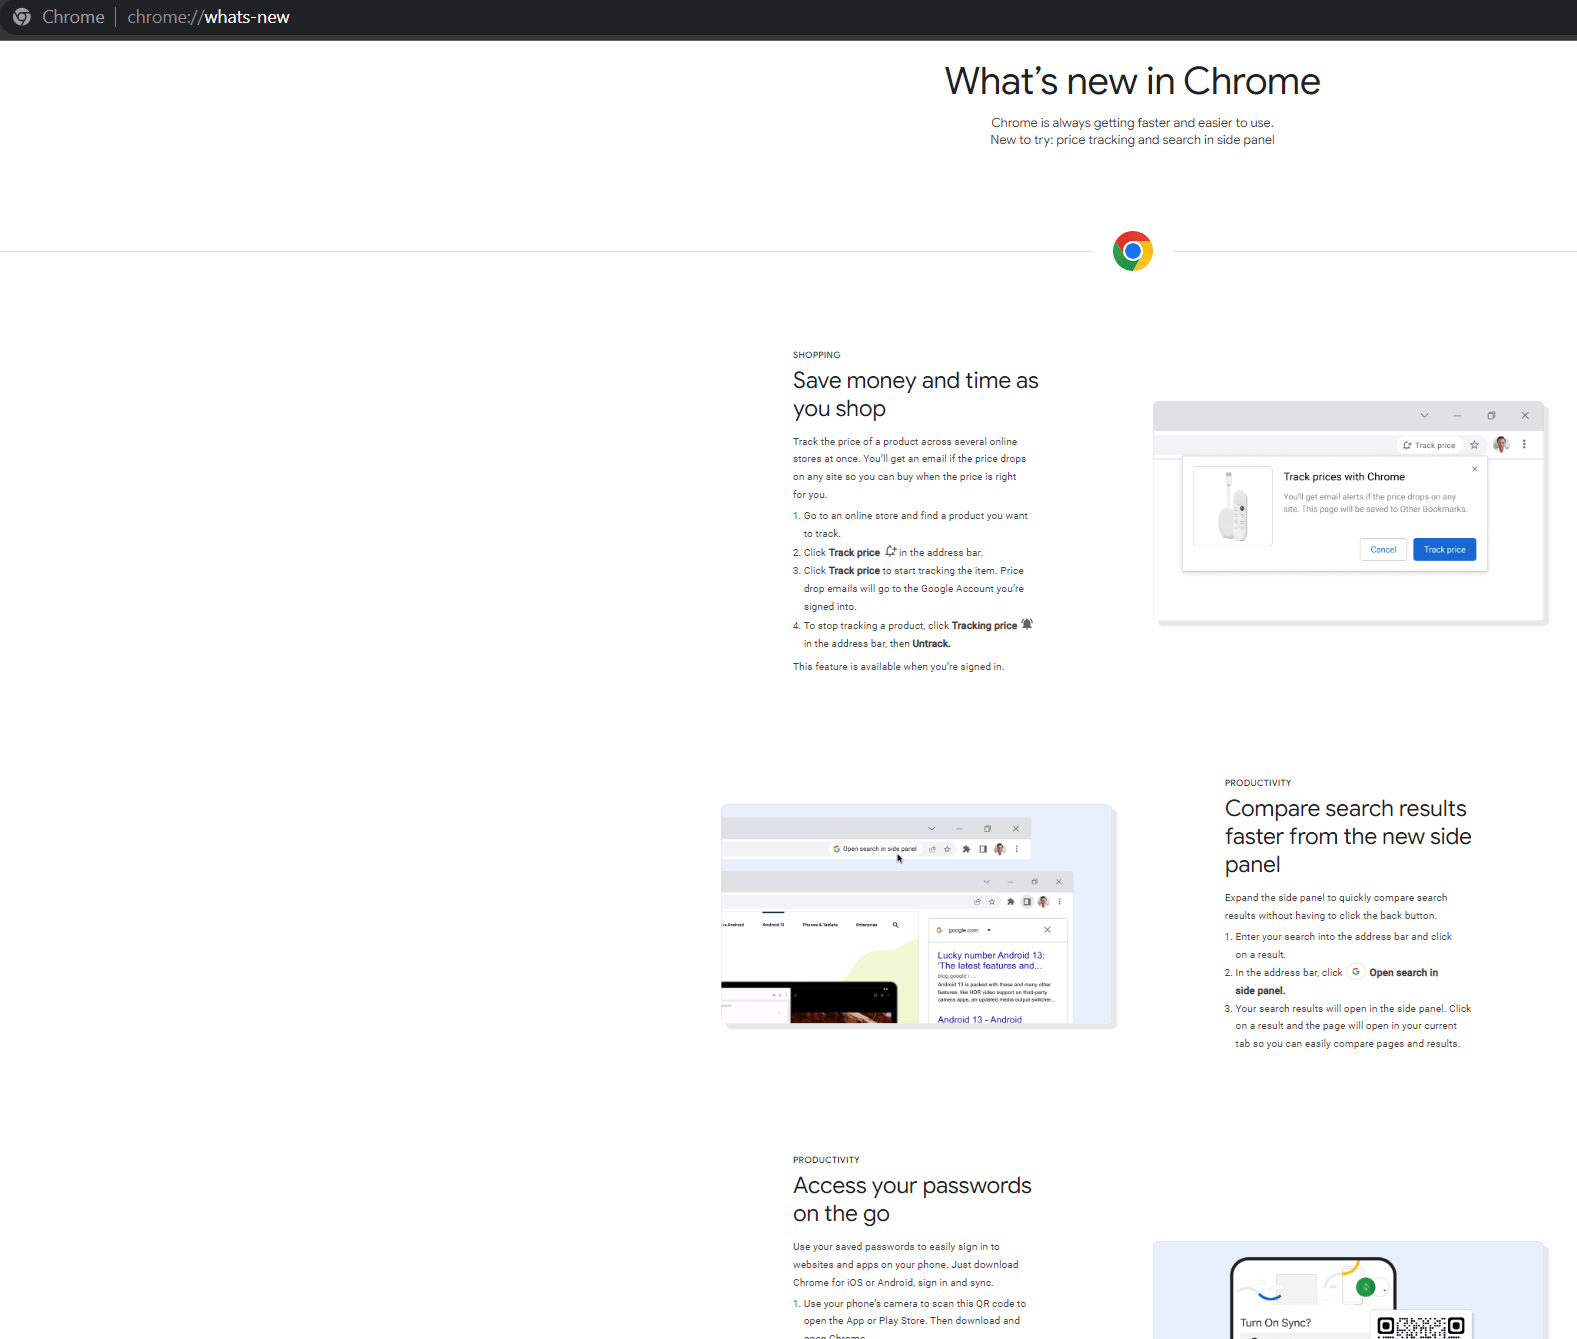 chrome's what's new page flag